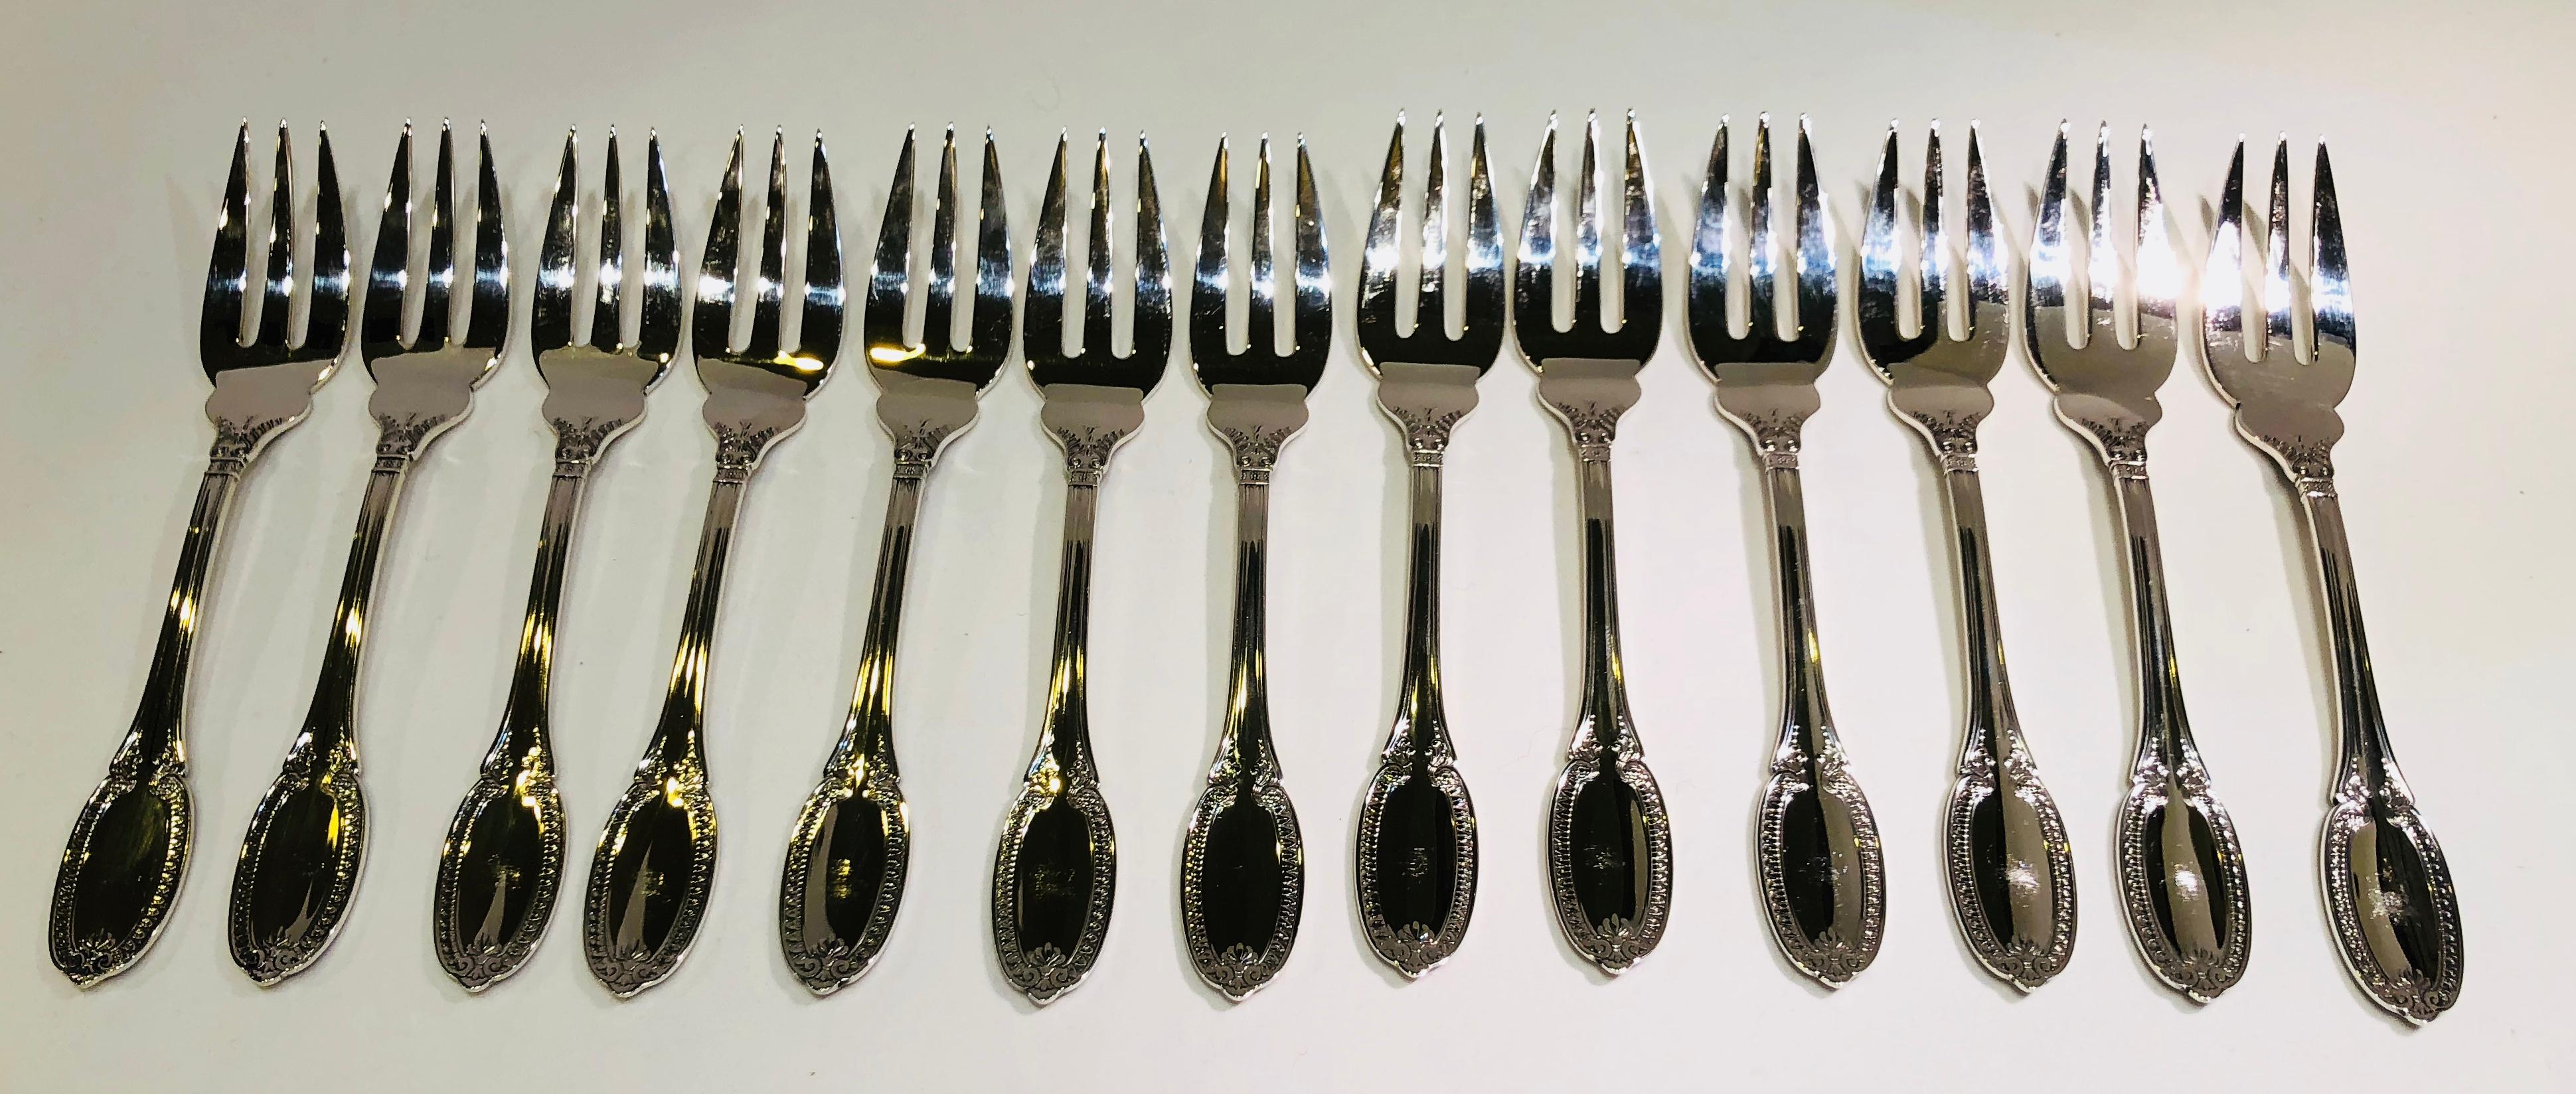 Hand-Crafted Superb 77 Piece Buccellati Sterling Silver Empire or Impero Flatware Set for 12